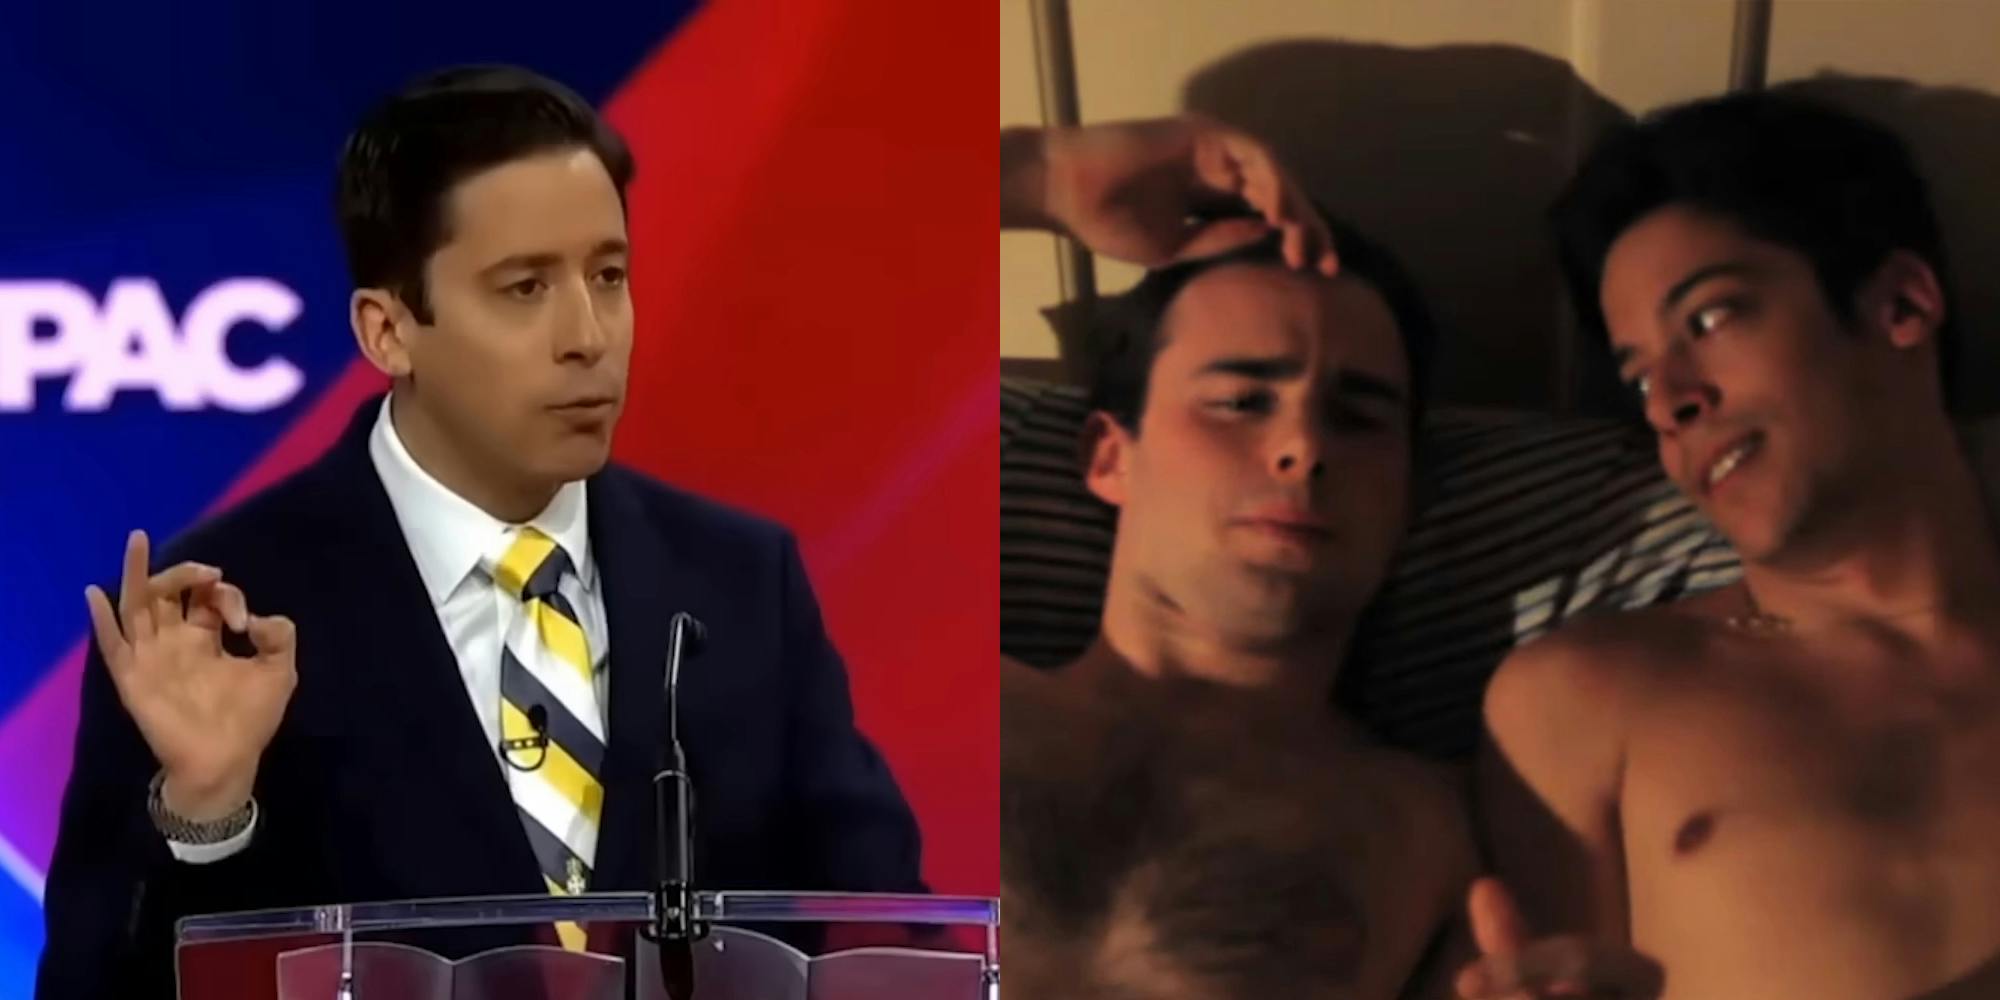 michael knowles at CPAC saying "Transgenderism must be eradicated" (l) michael knowles shirtless in bed with a man (r)